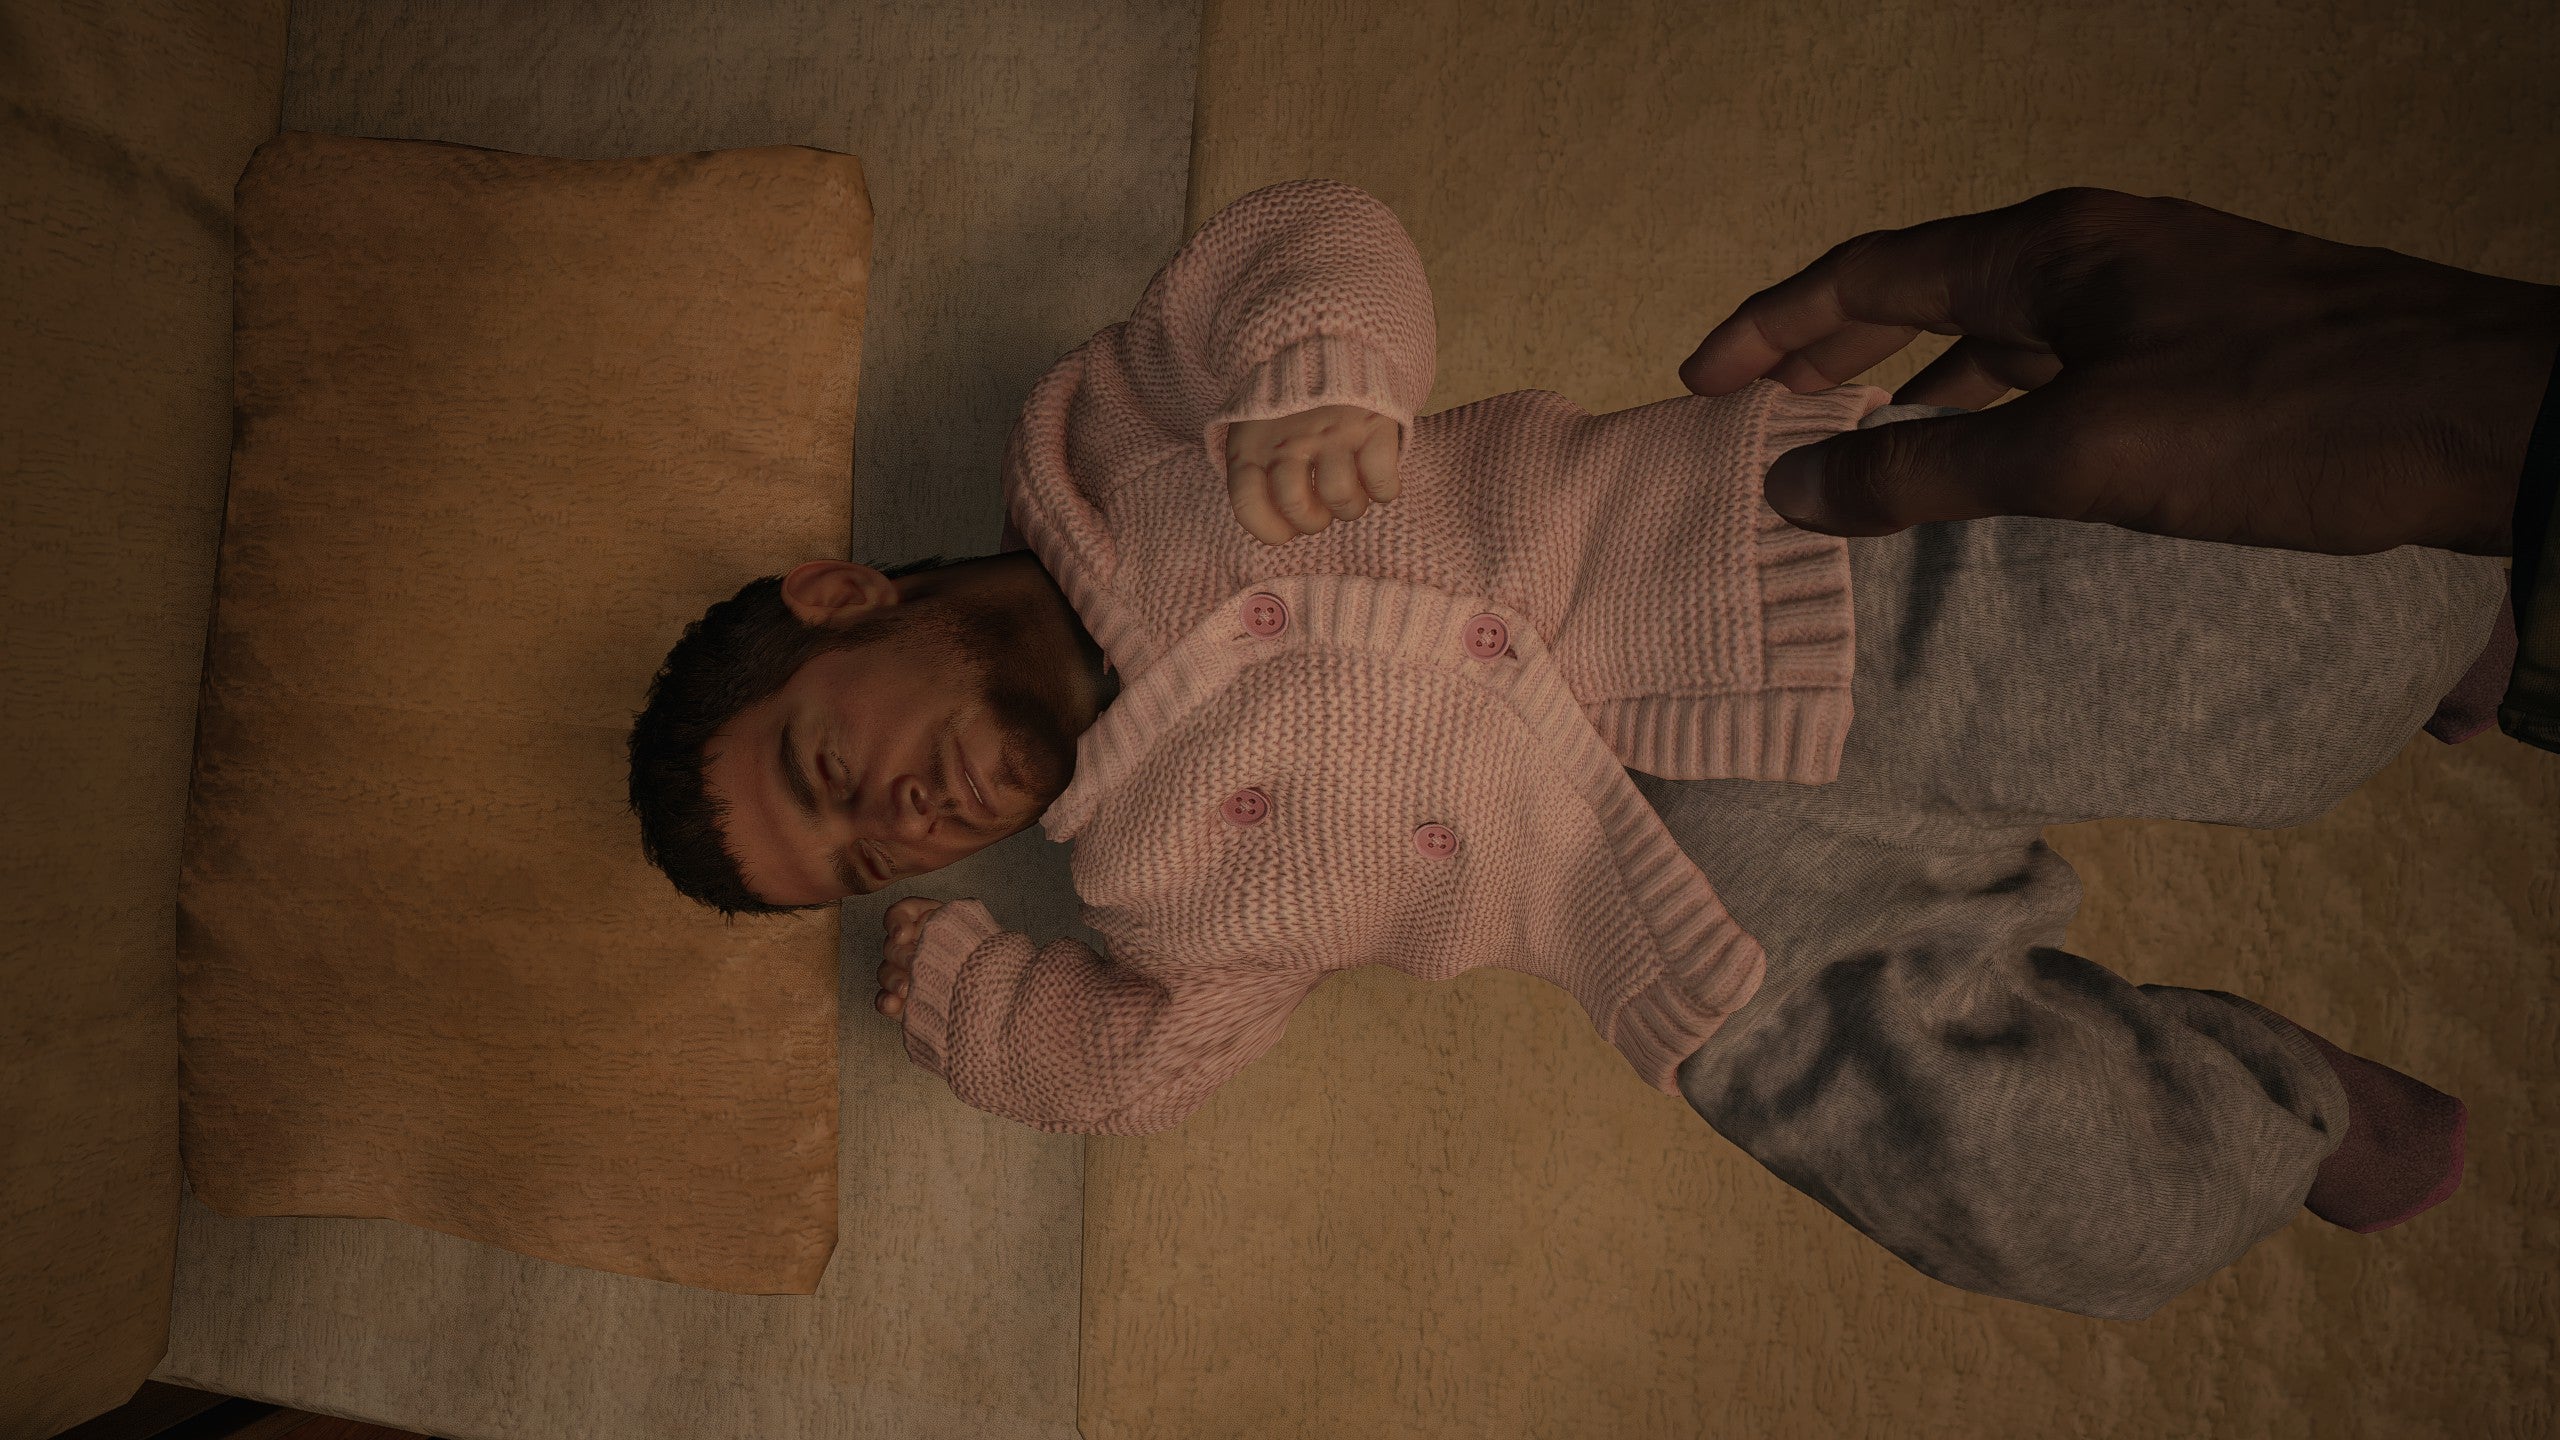 Resident Evil Village mod - A baby laying in a crib wearing a pink sweater has the face of adult Chris Redfield.